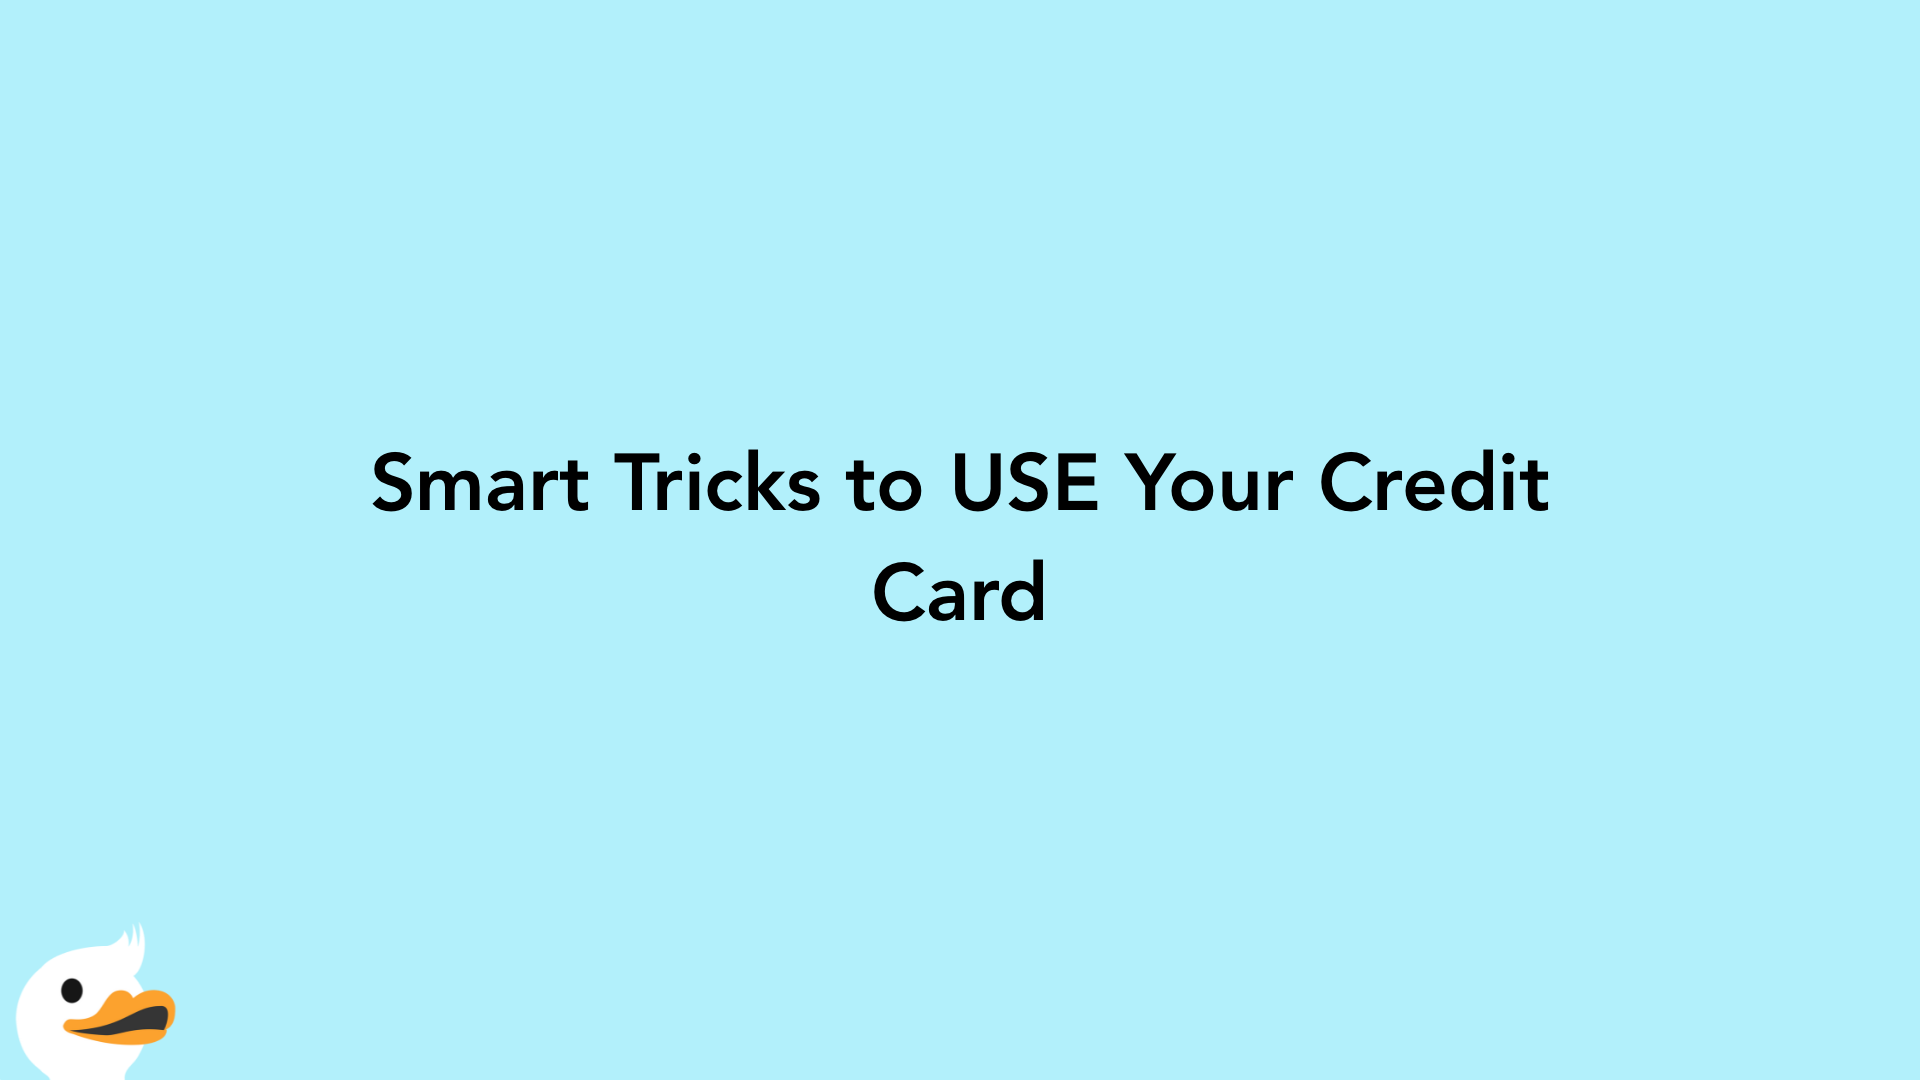 Smart Tricks to USE Your Credit Card